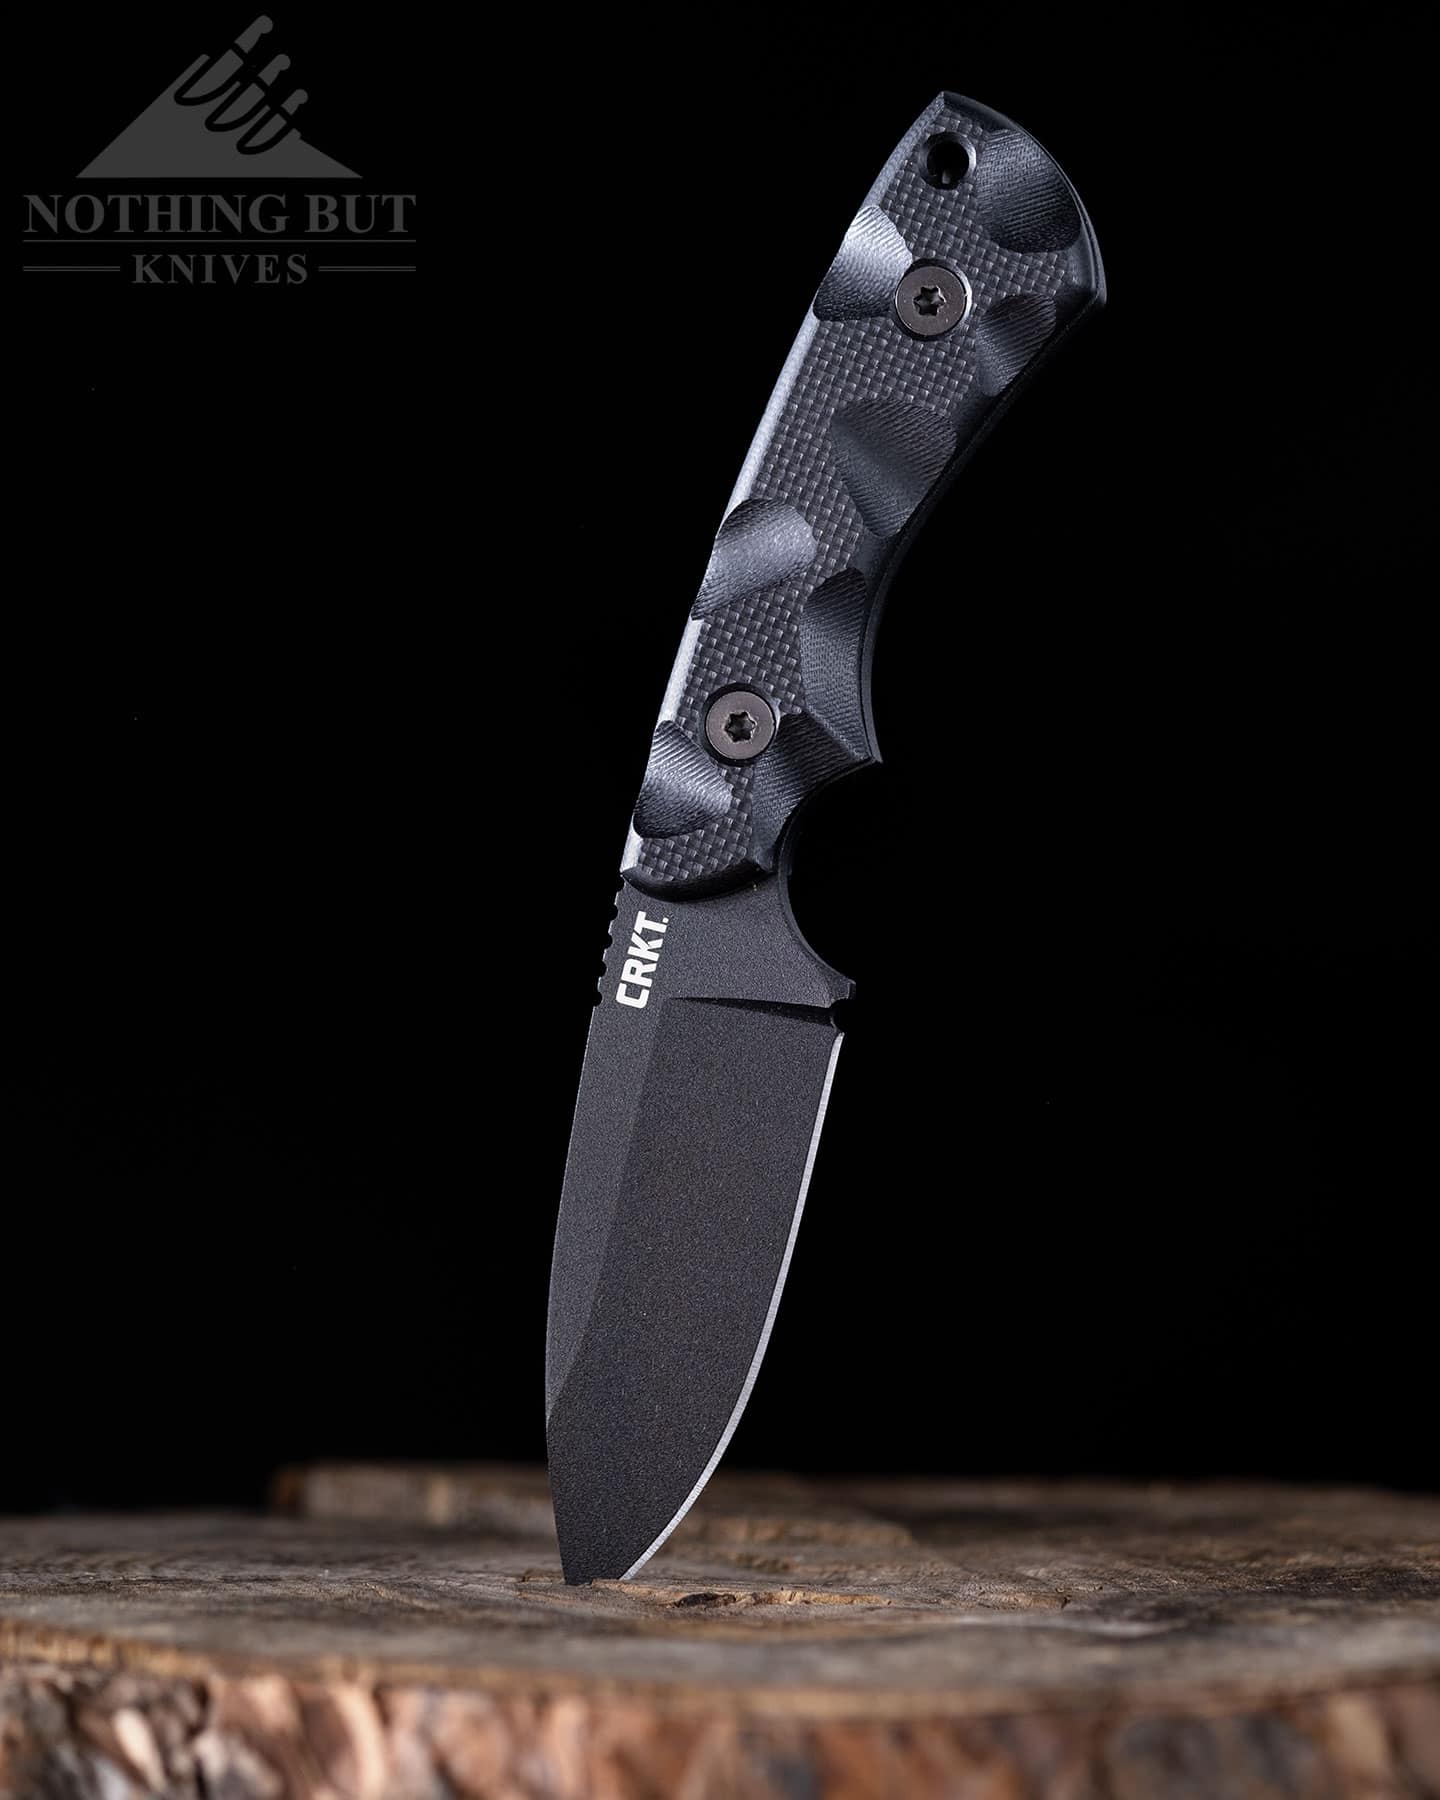 The CRKT Siwi is a great choice for anyone looking for a small knife for self defense.